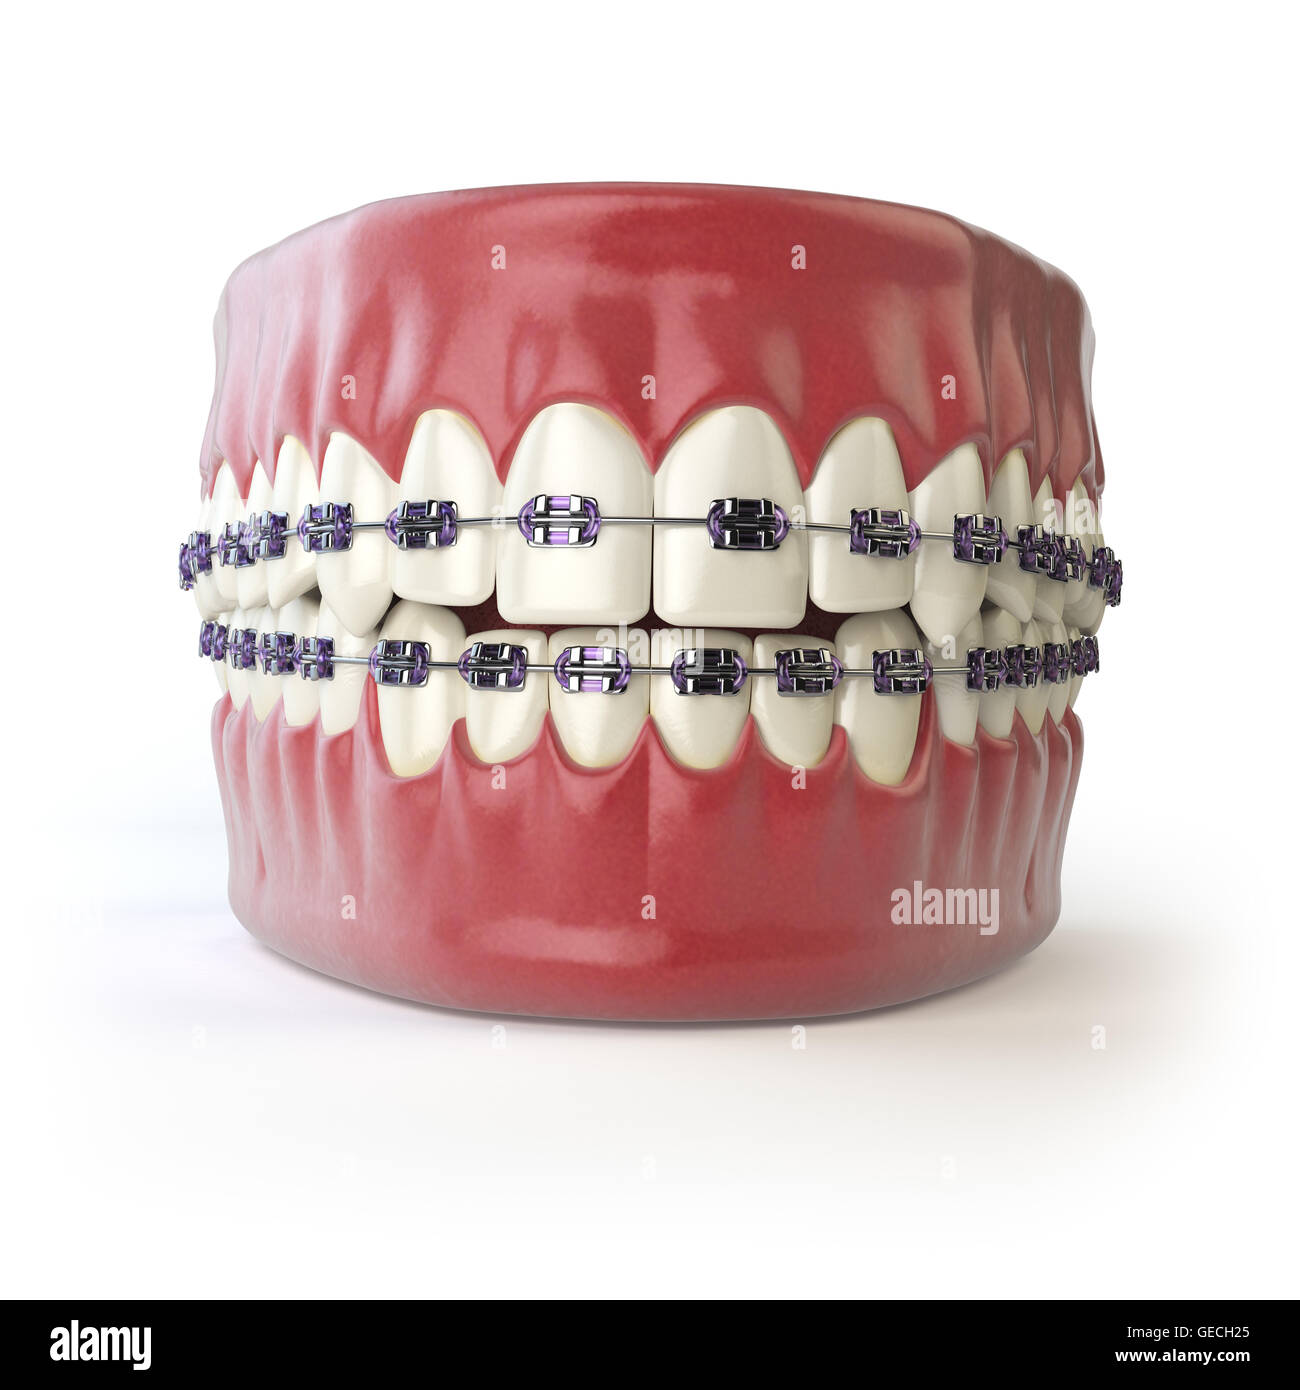 Teeth with braces or brackets isolated on white. Dental care concept. 3d illustration Stock Photo